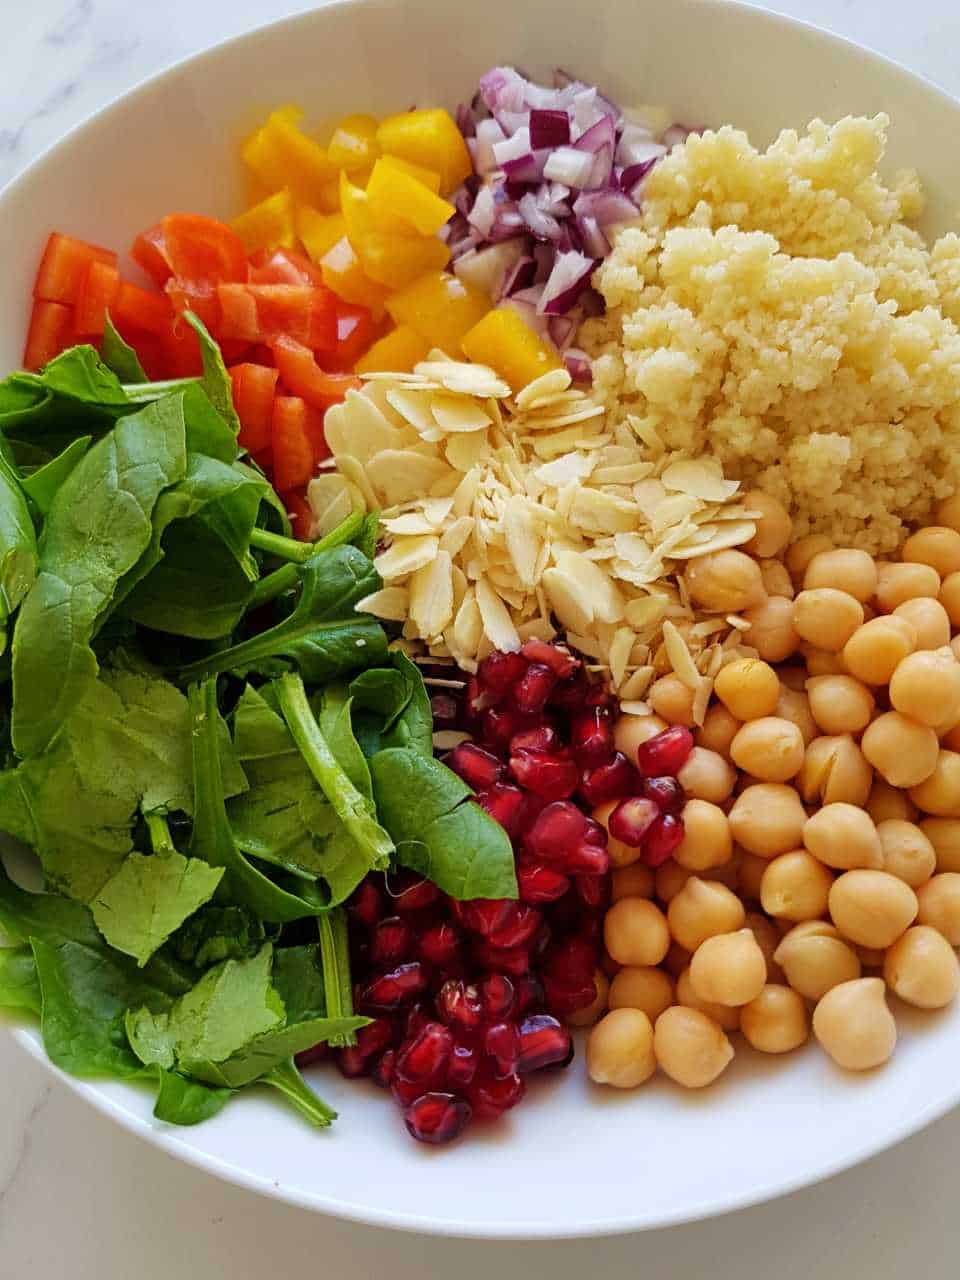 Couscous salad ingredients in a white bowl - do not mix together.